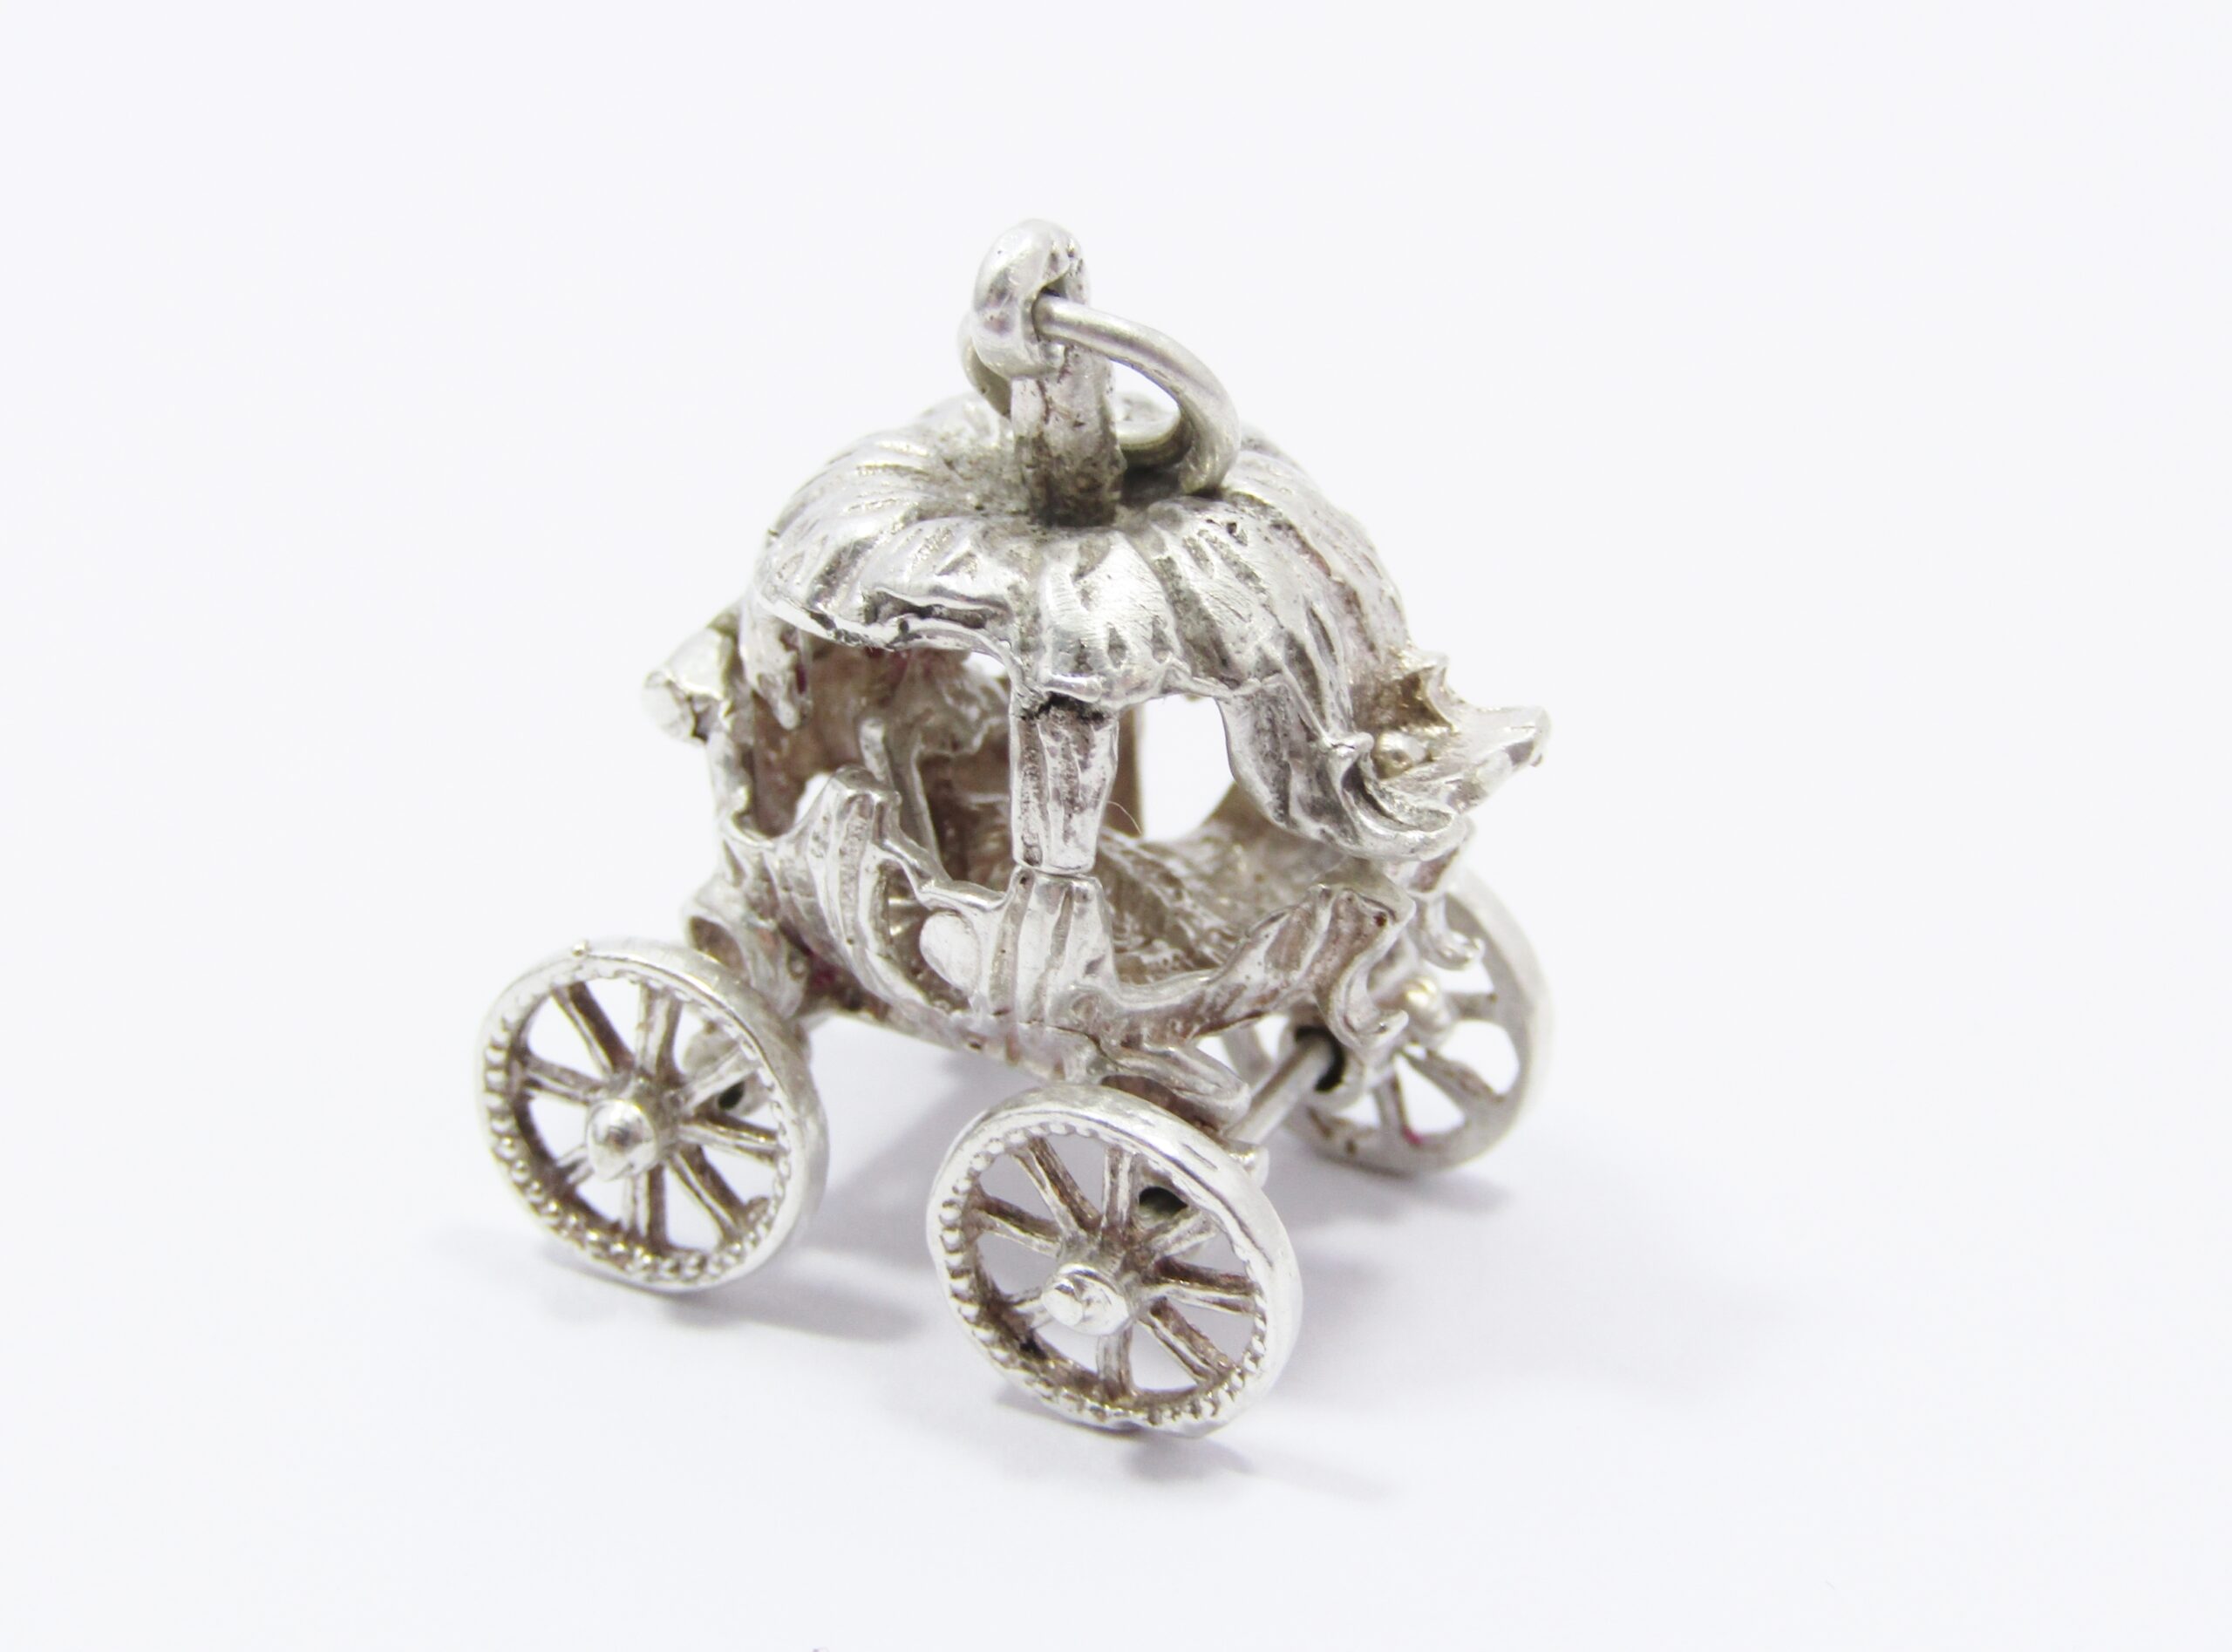 A Beautiful Detailed Pumpkin Carriage in Sterling Silver